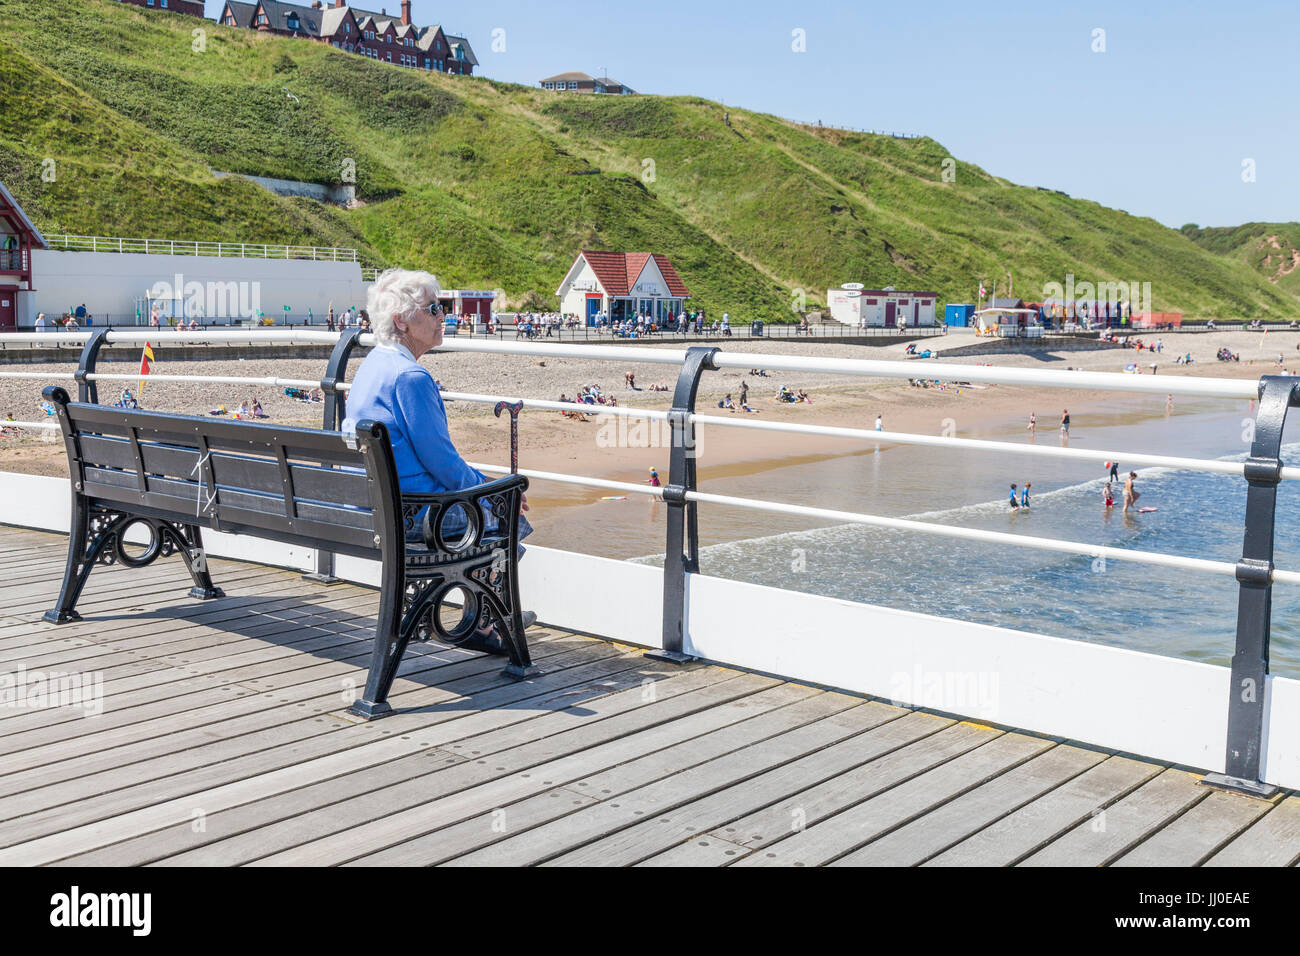 A Mature Woman Sat On A Bench By Herself Looking Out To Sea At Saltburn By The Sea England Uk